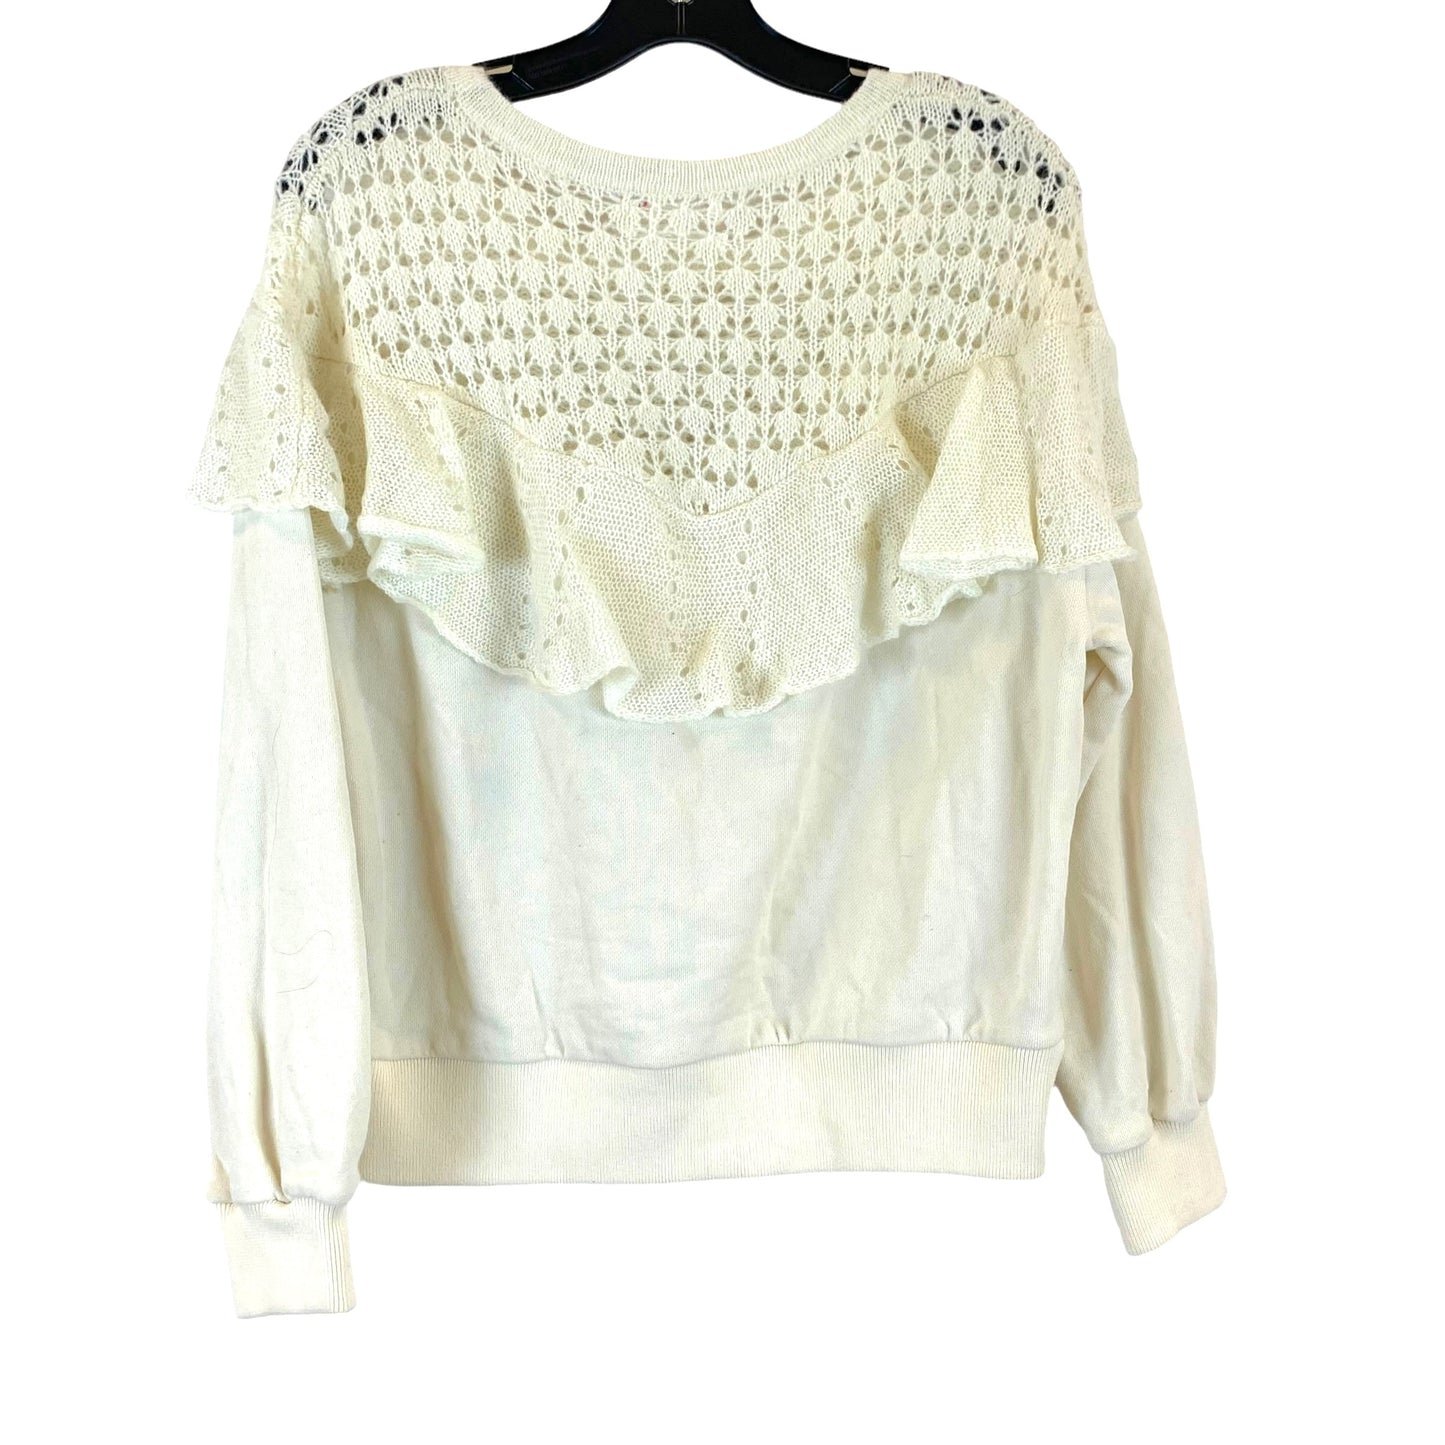 Sweater By Anthropologie  Size: M